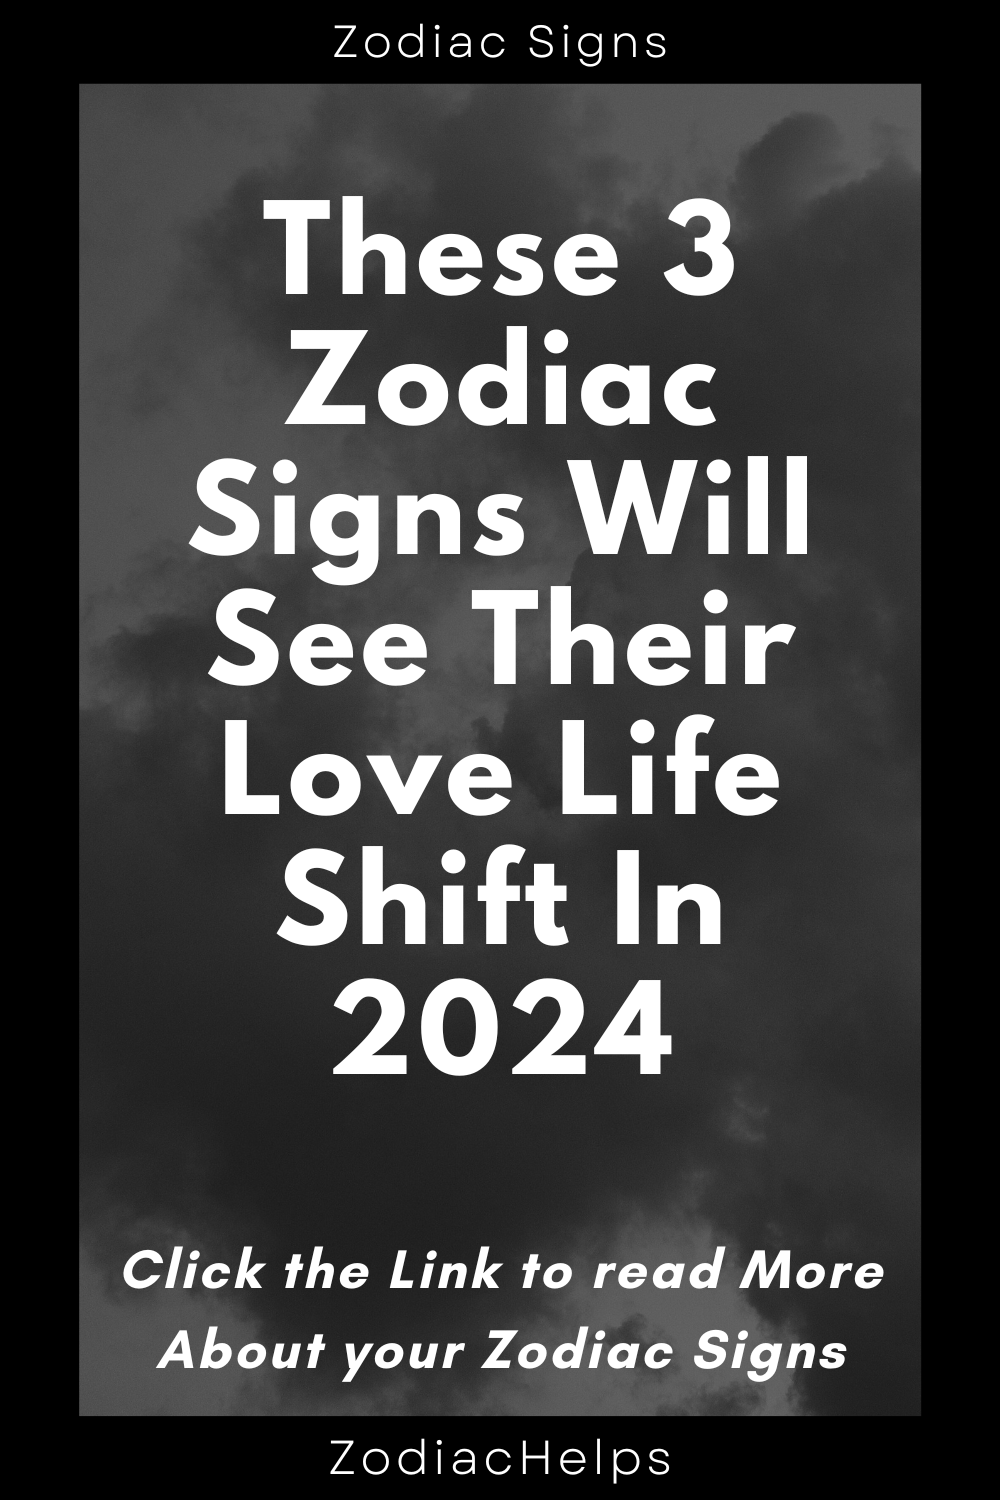 These 3 Zodiac Signs Will See Their Love Life Shift In 2024